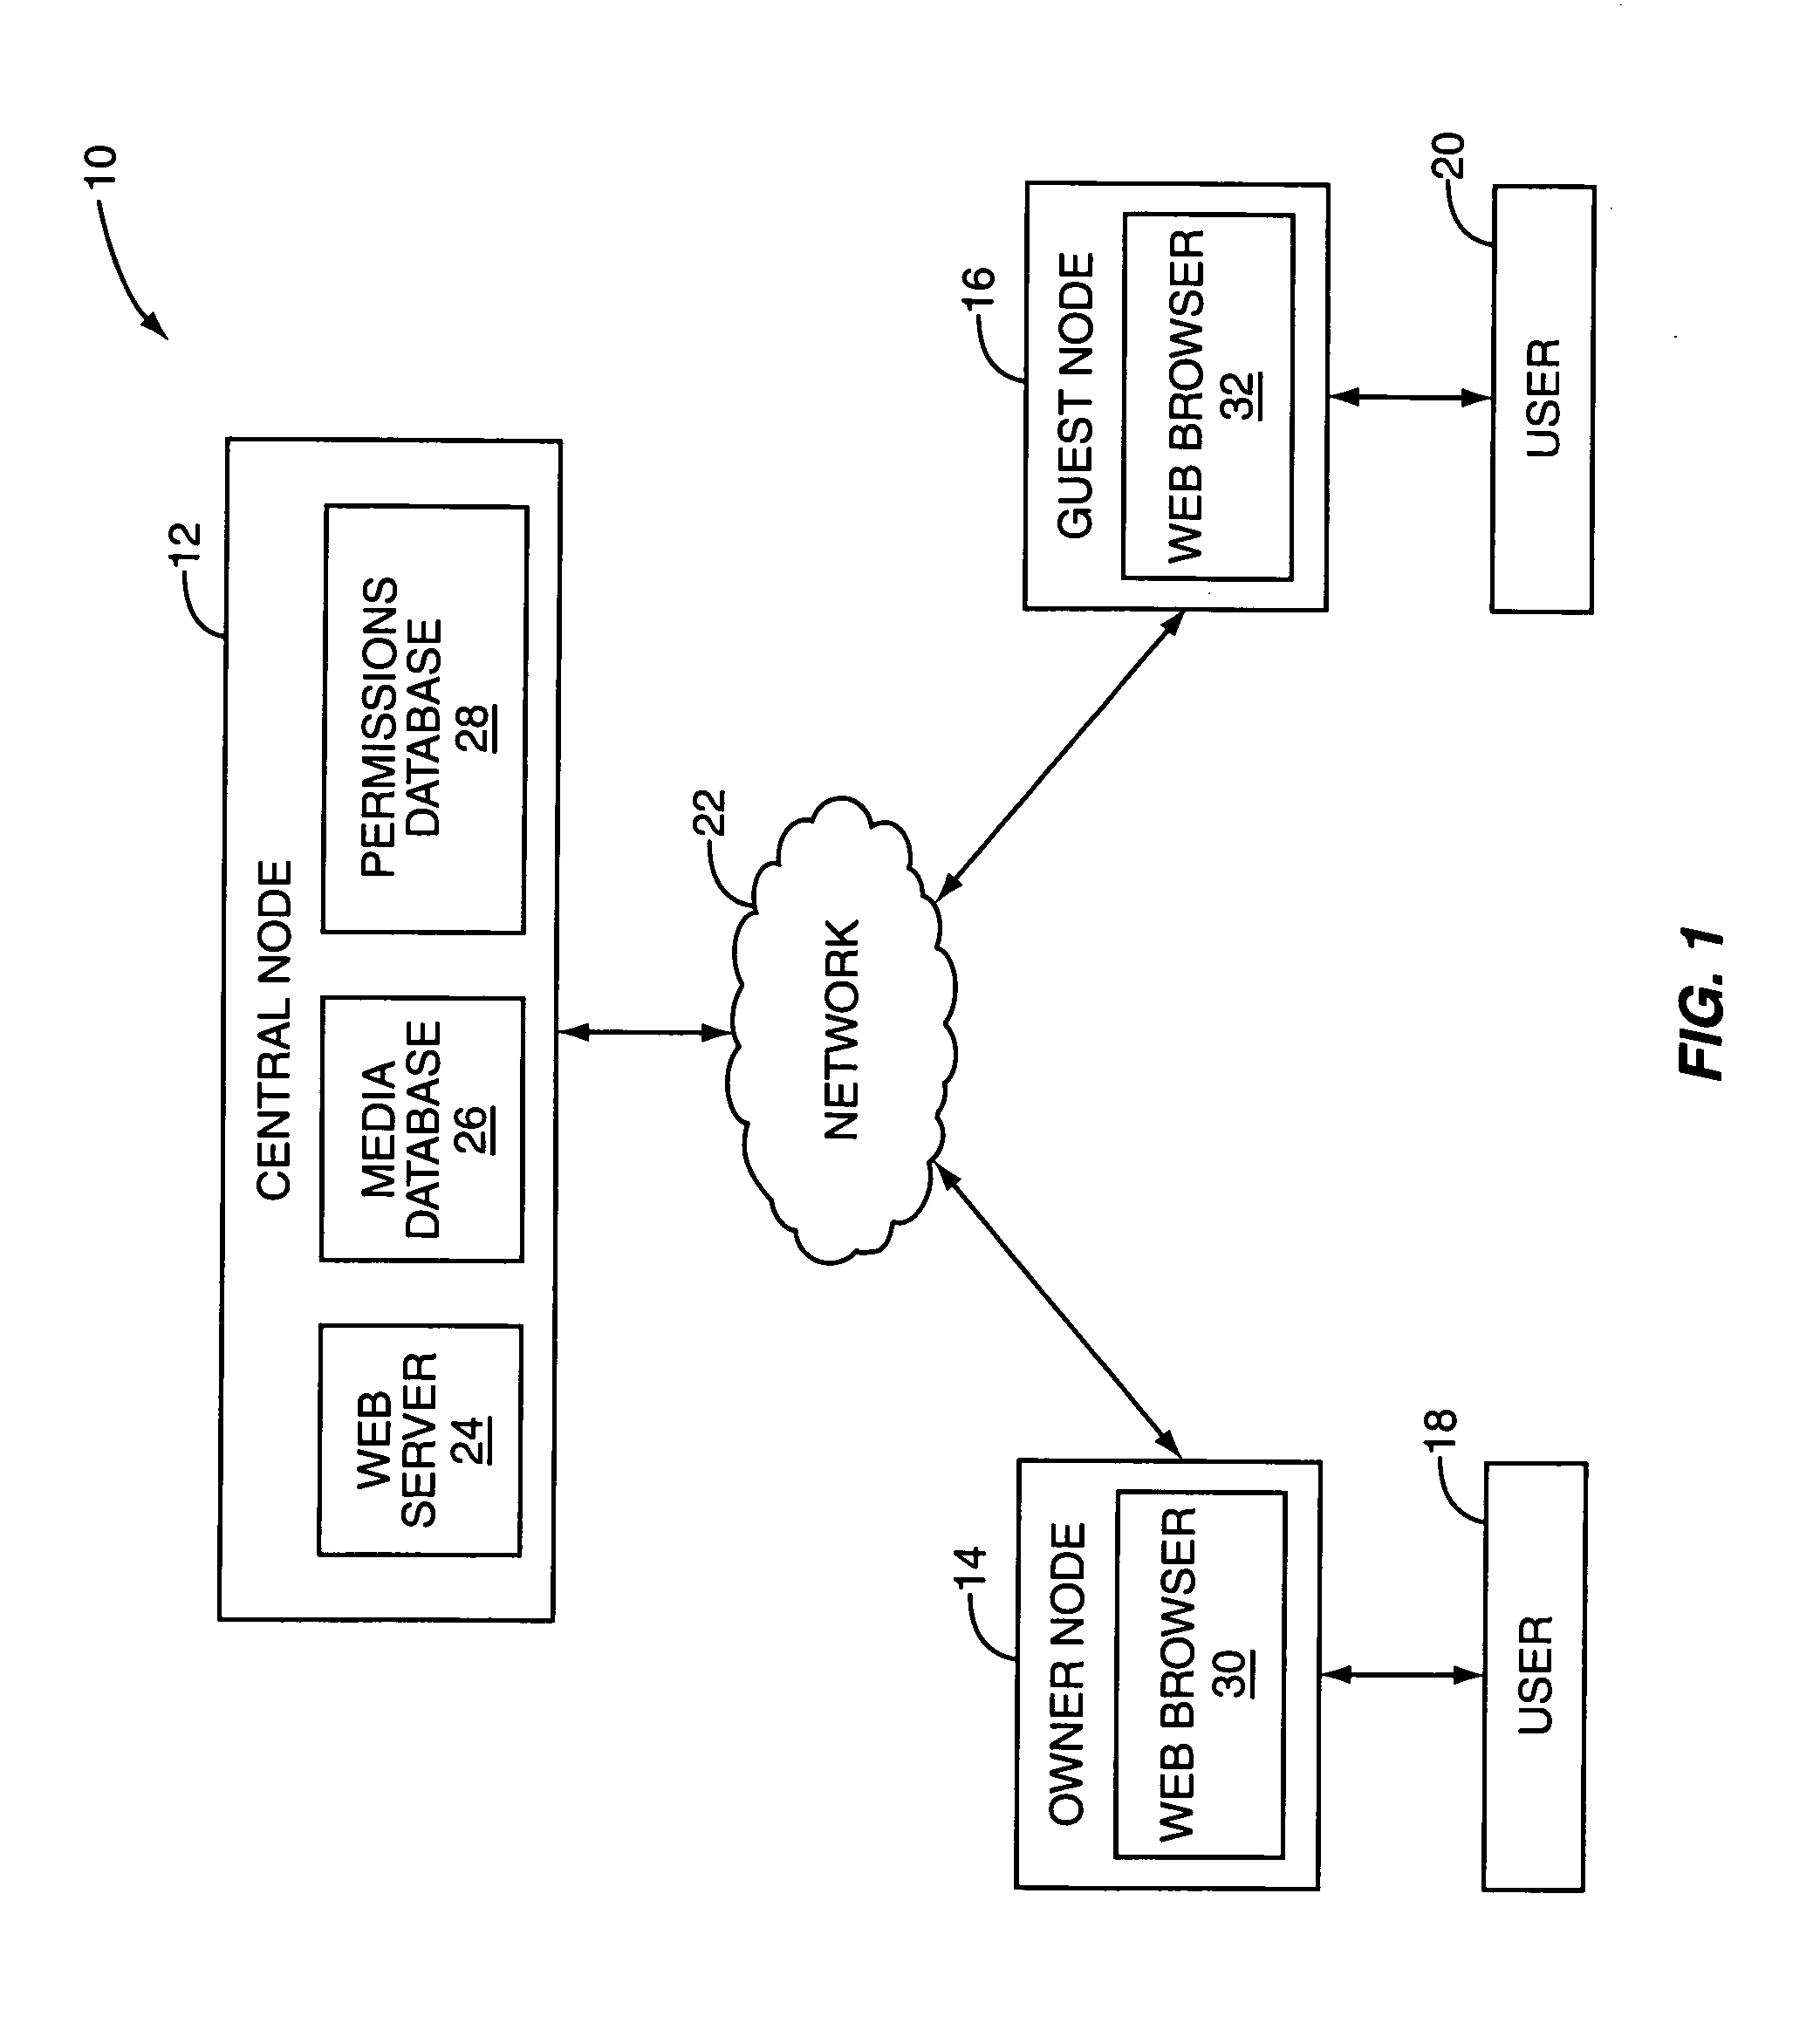 System and method for controlling access to assets in a network-based media sharing system using tagging